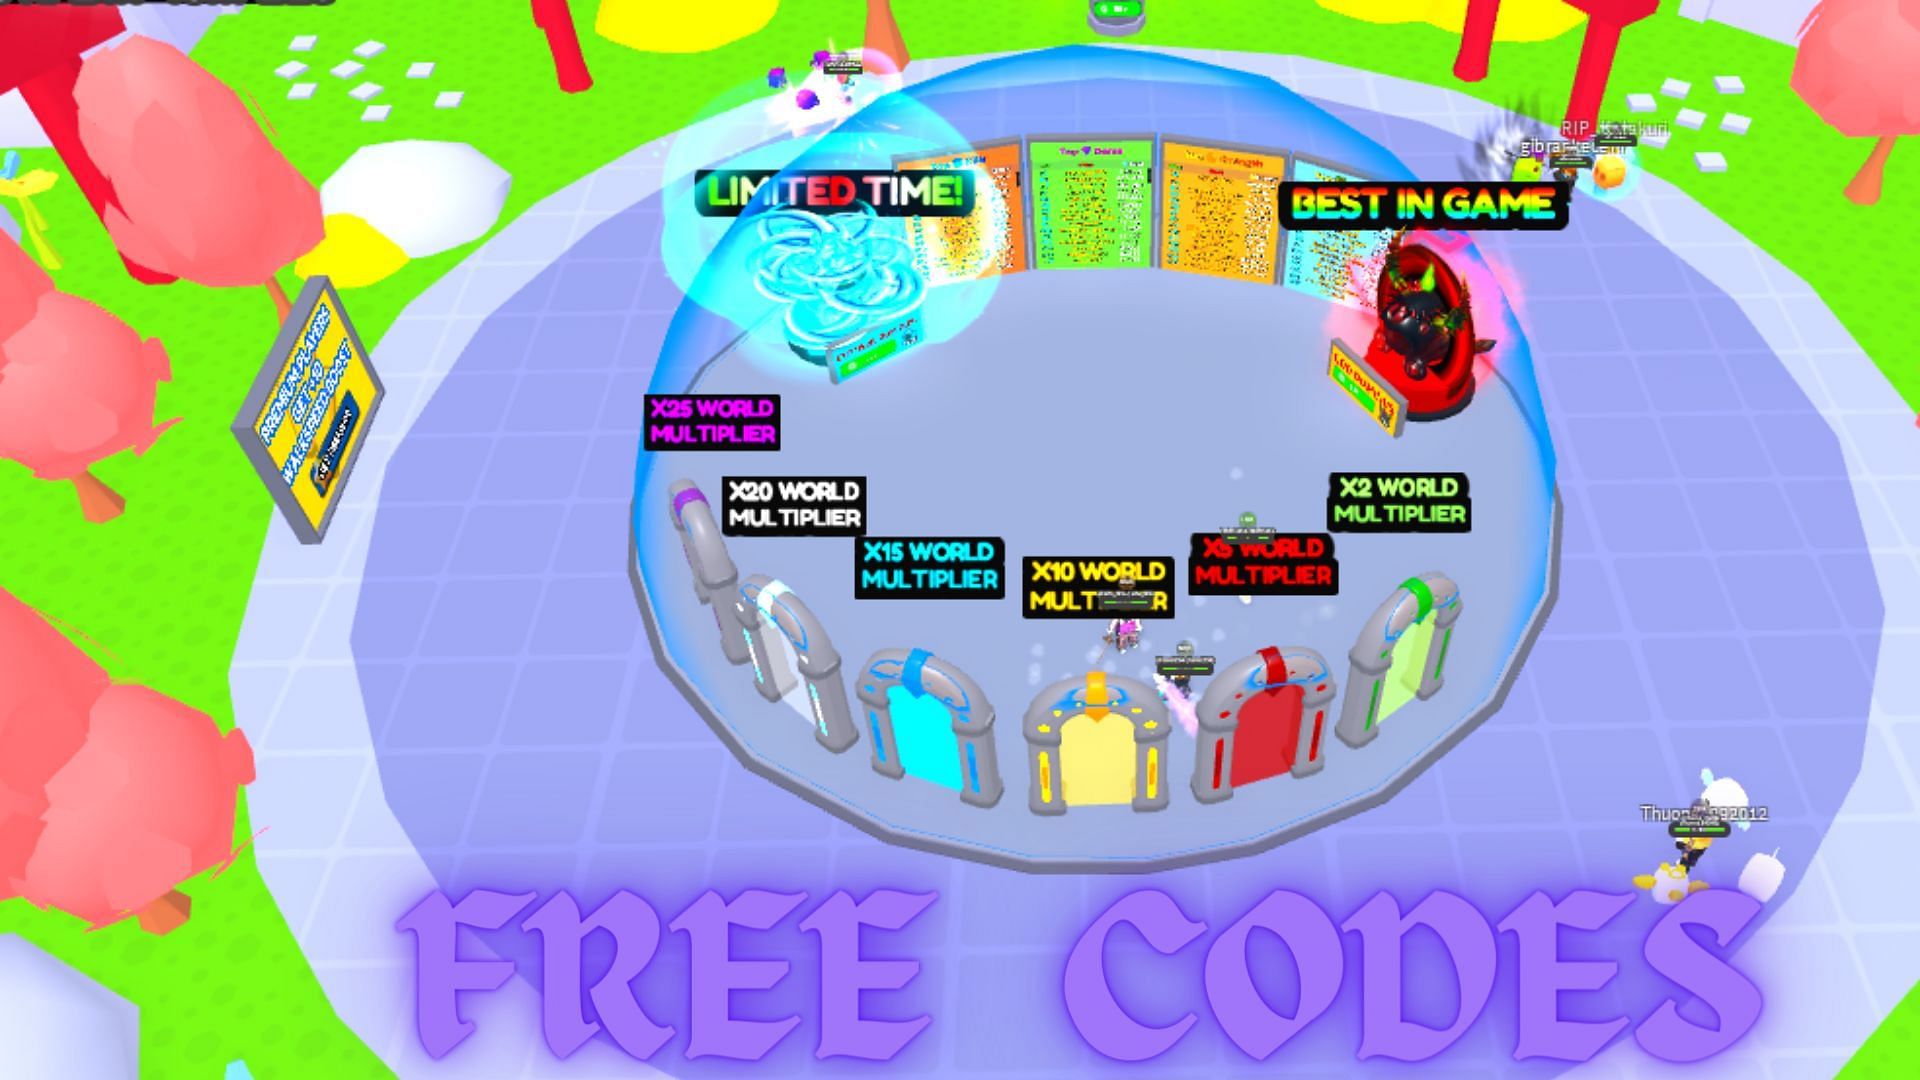 There are many free active codes in Strong Ninja Simulator (Image via Roblox || Sportskeeda)